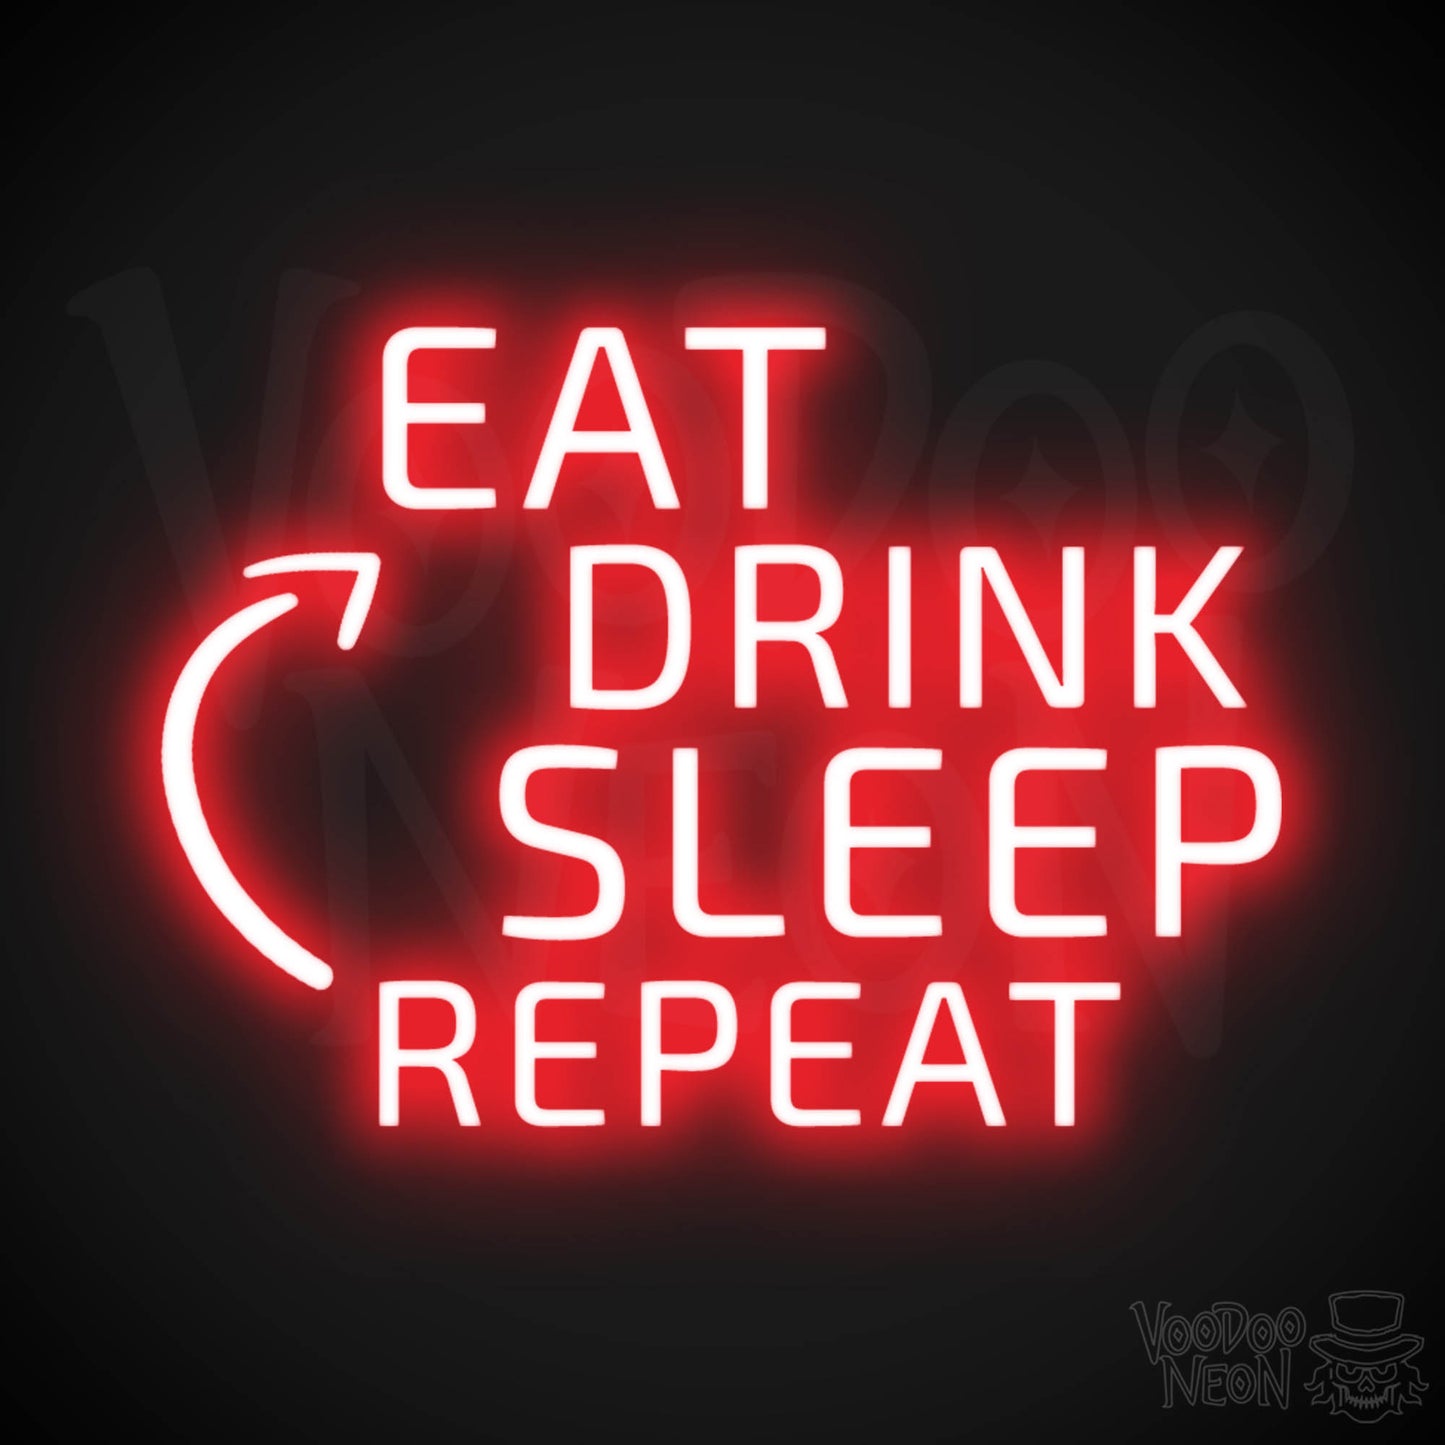 Eat Drink Sleep Repeat Neon Sign - Eat Drink Sleep Repeat Sign - Color Red